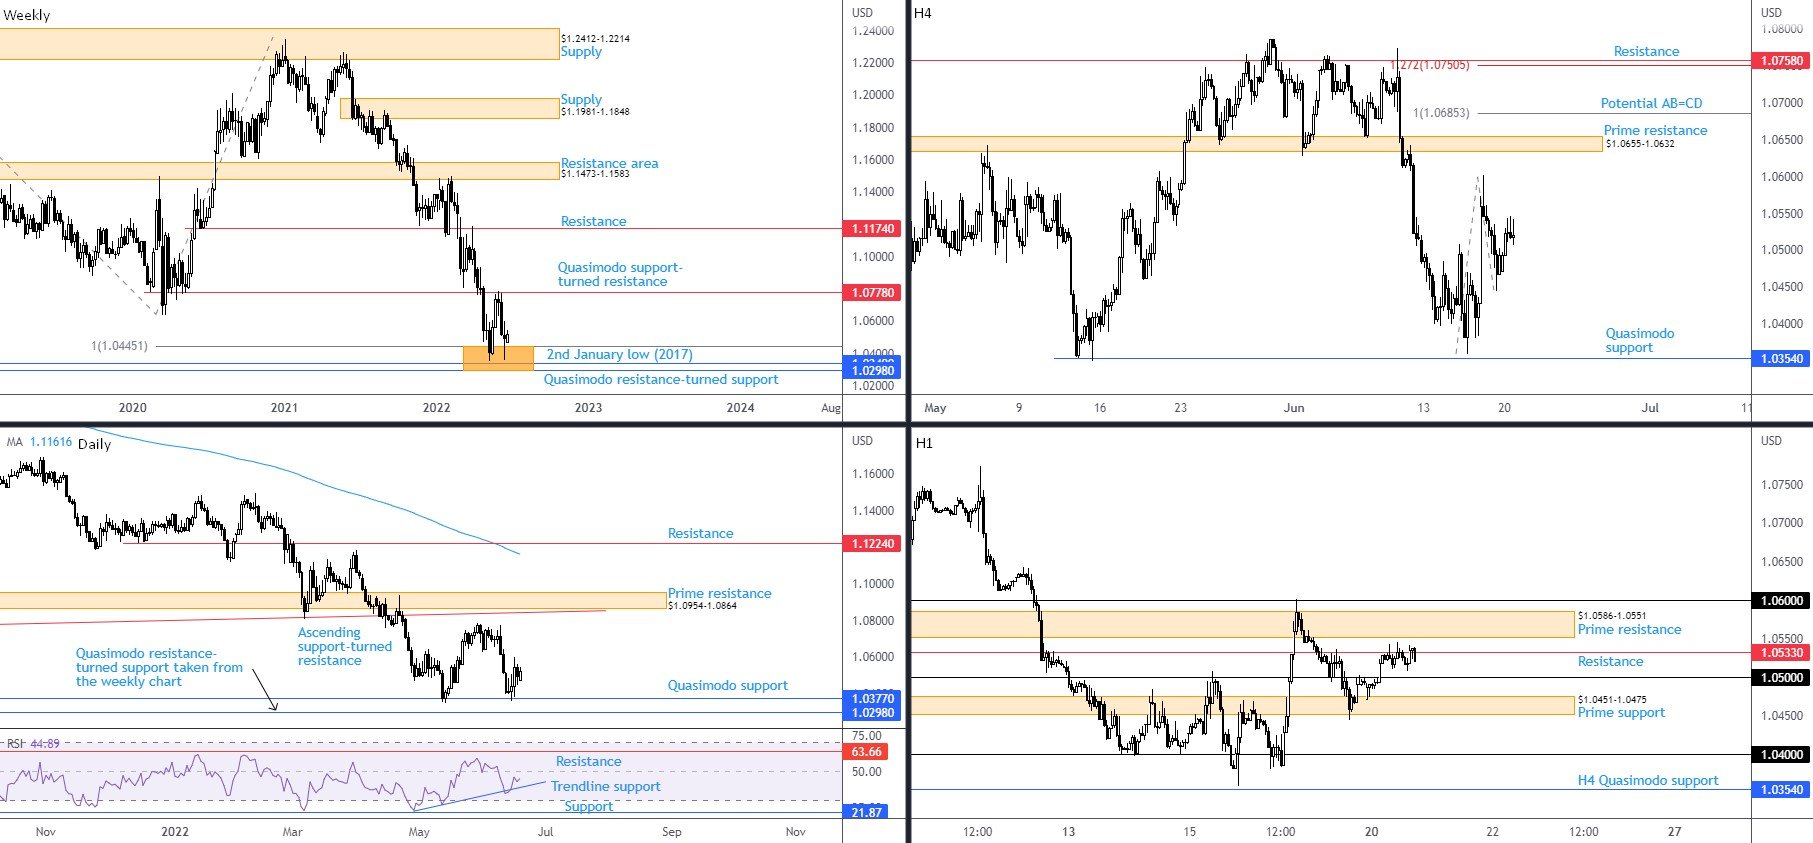 Technical View for June 21st 2022: $1.05 Echoing Potential Weakness on EUR/USD; $1.04 Eyed, FP Markets